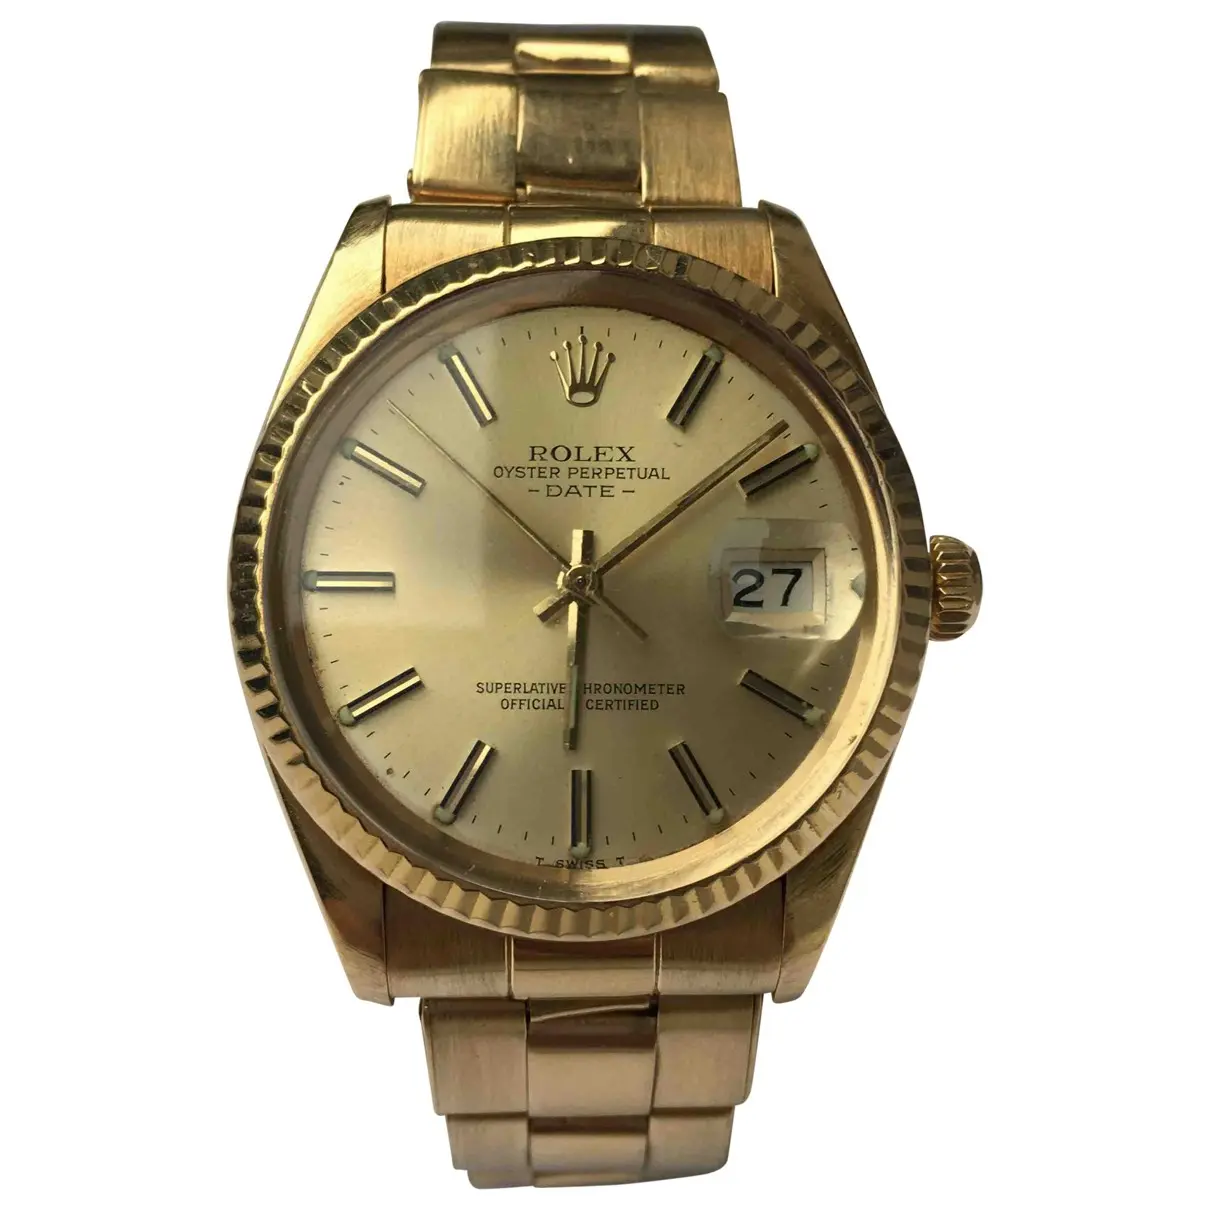 Oyster Perpetual yellow gold watch Rolex - Vintage